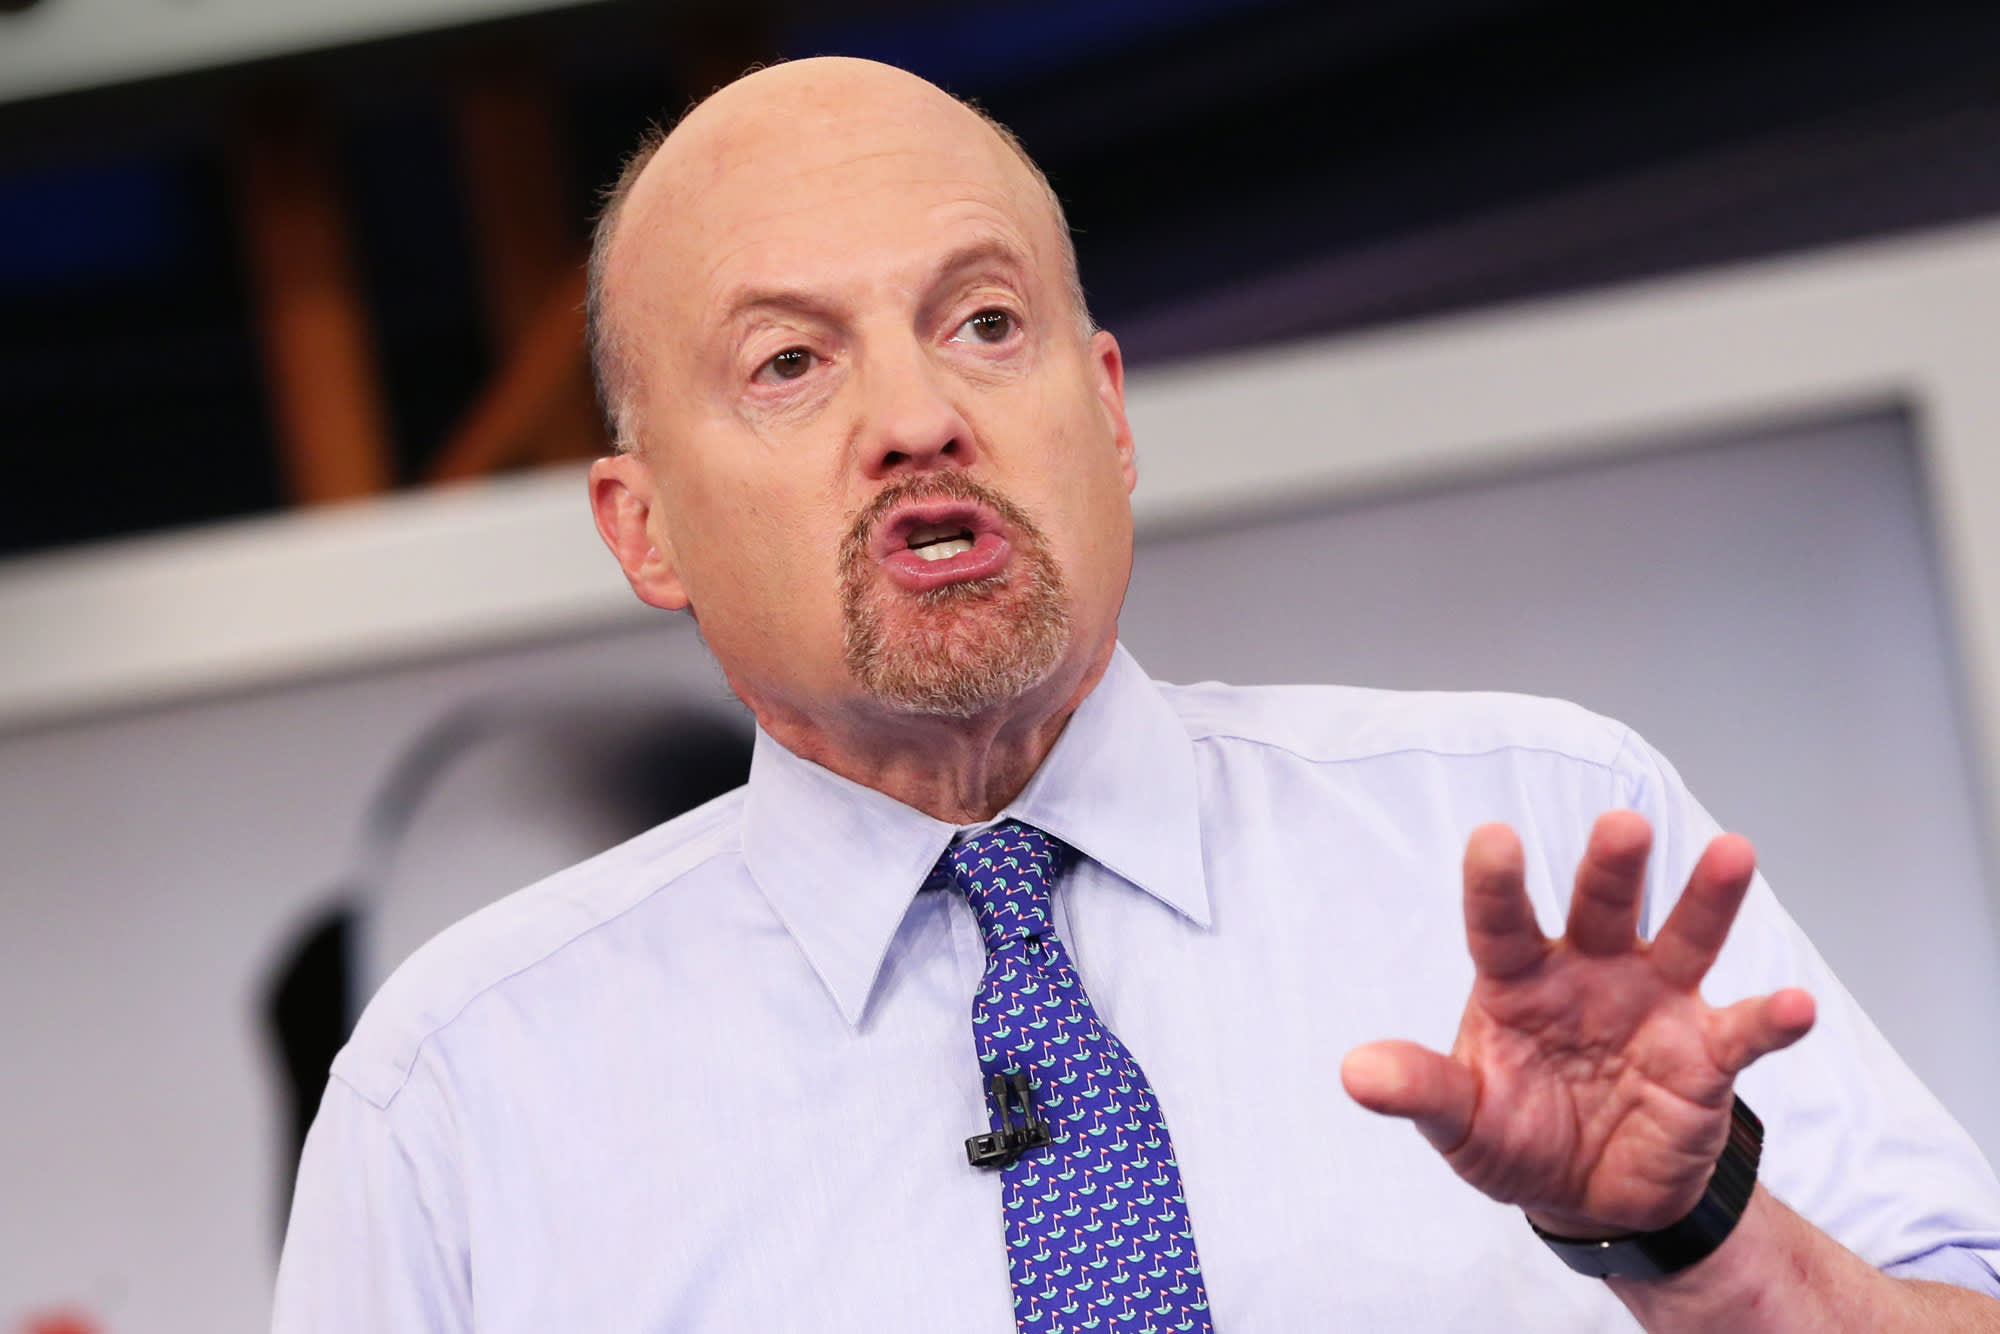 Why Jim Cramer sees opportunity in troubled shares of spice maker McCormick